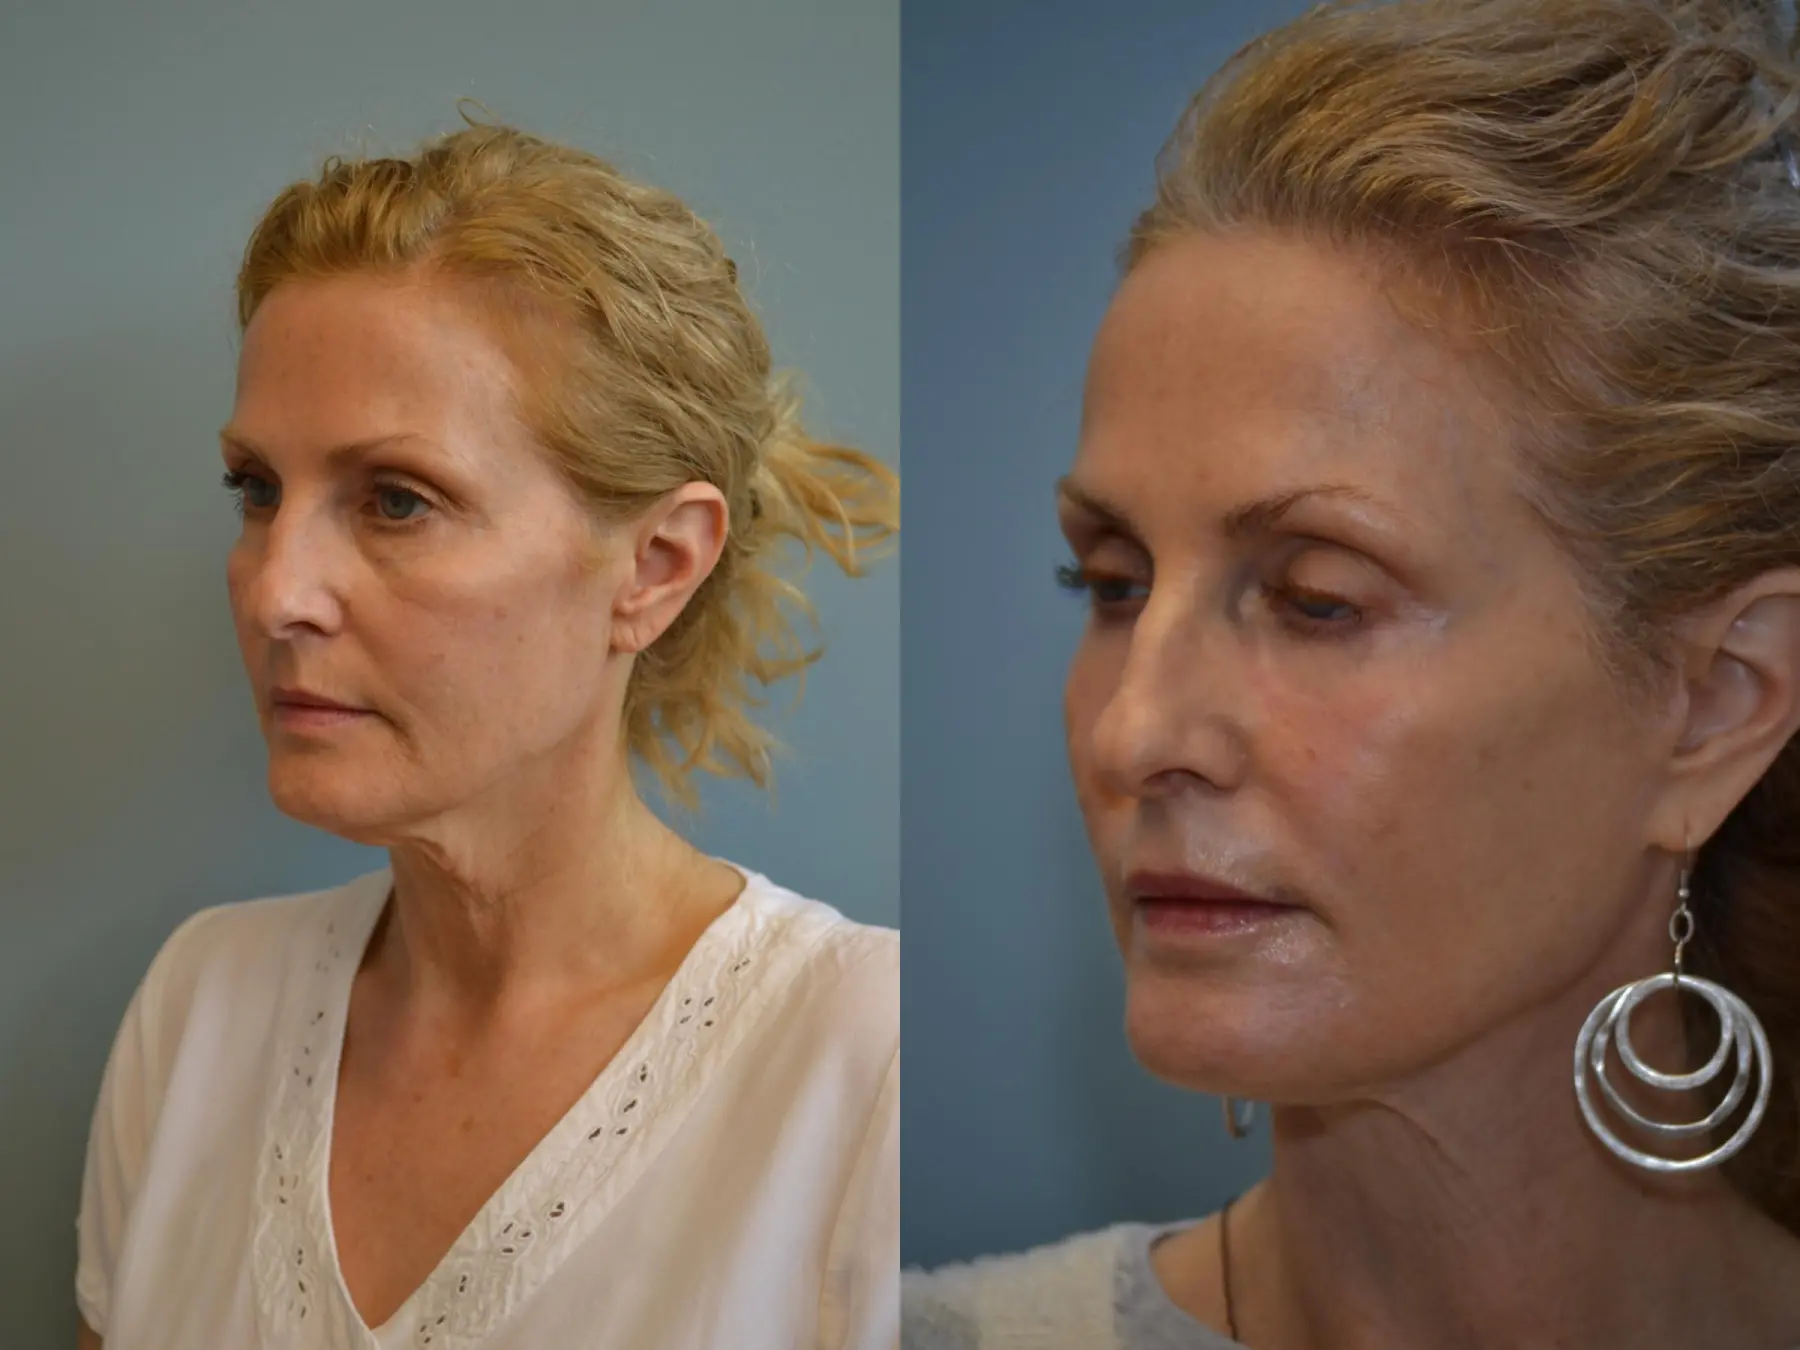 Laser Skin Resurfacing - Face: Patient 3 - Before and After 2